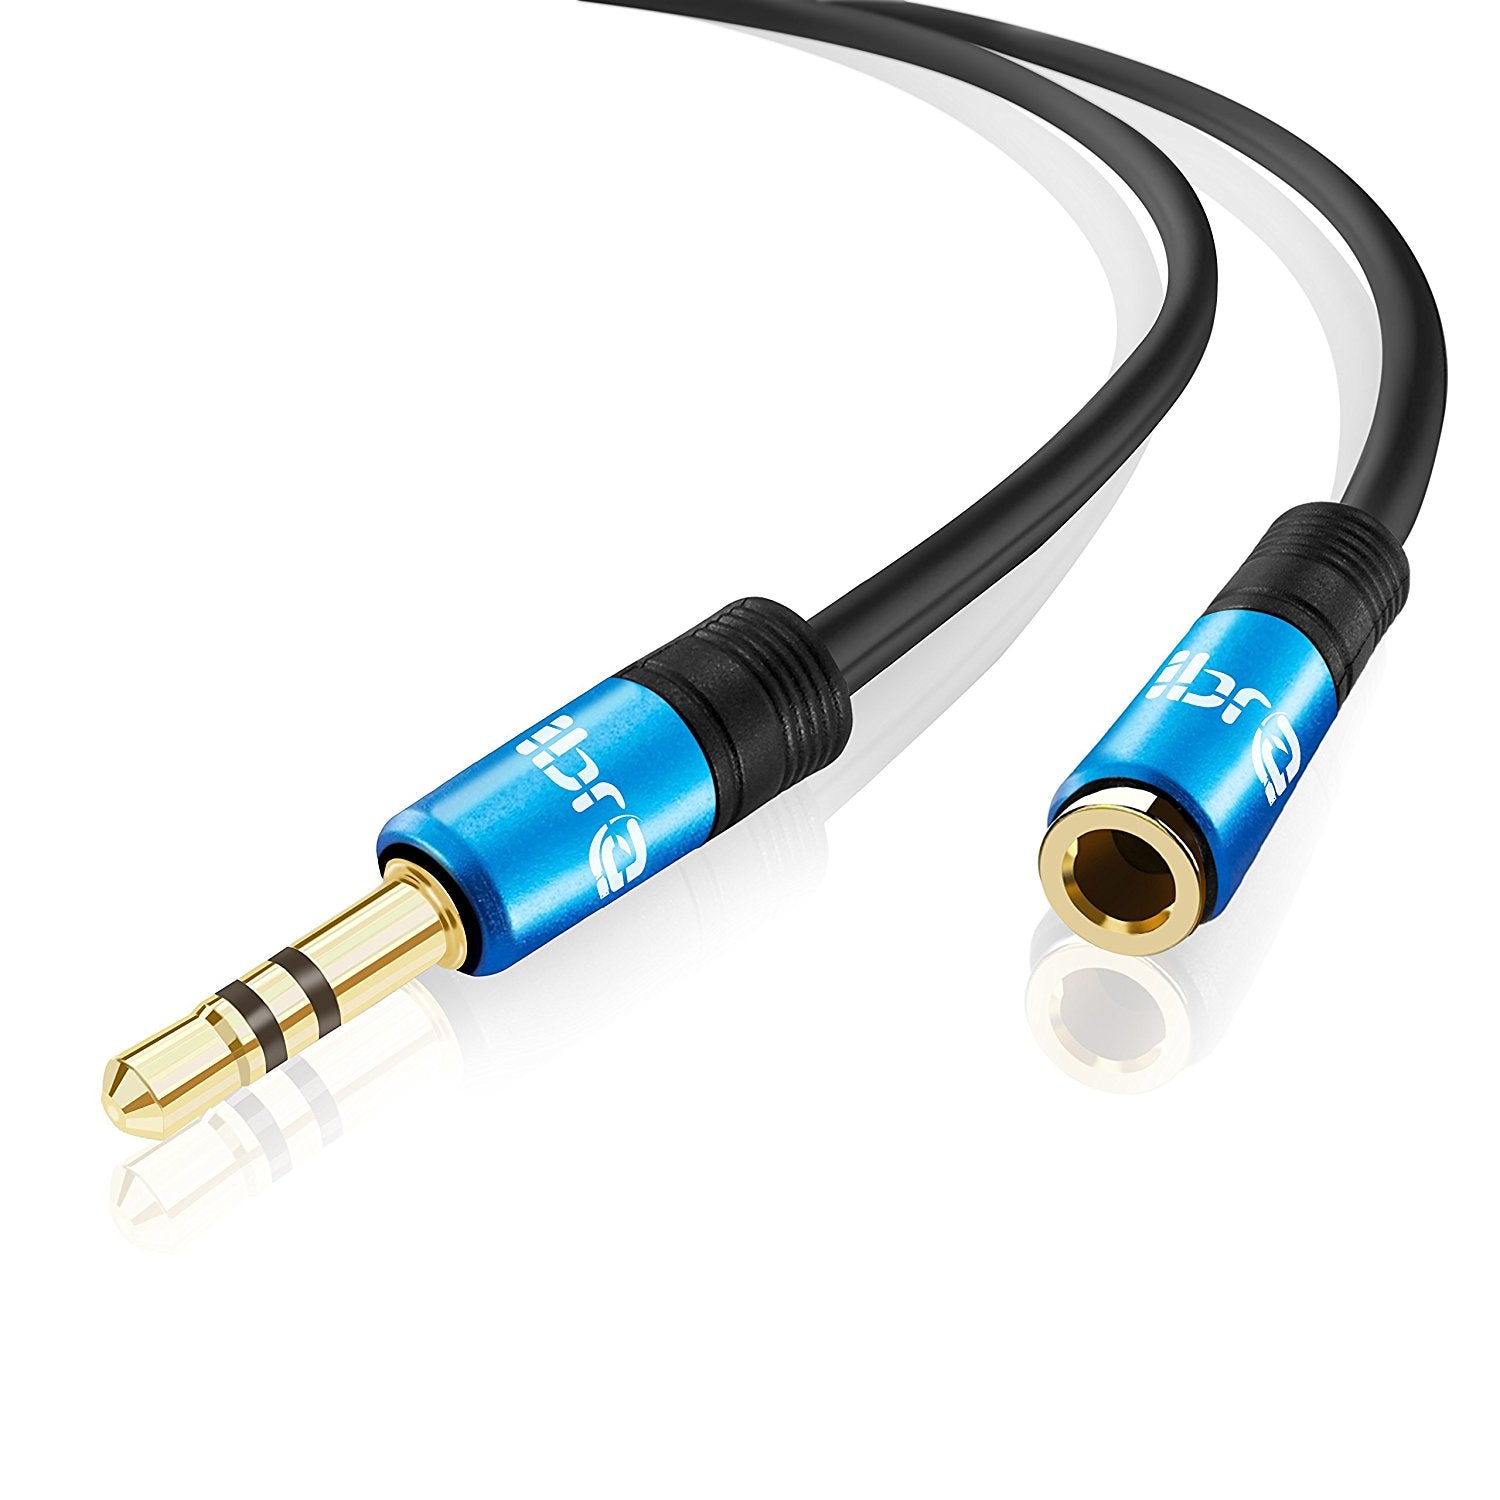 IBRA 0.5M Stereo Jack Extension Cable 3.5mm Male > 3.5mm Female - Blue